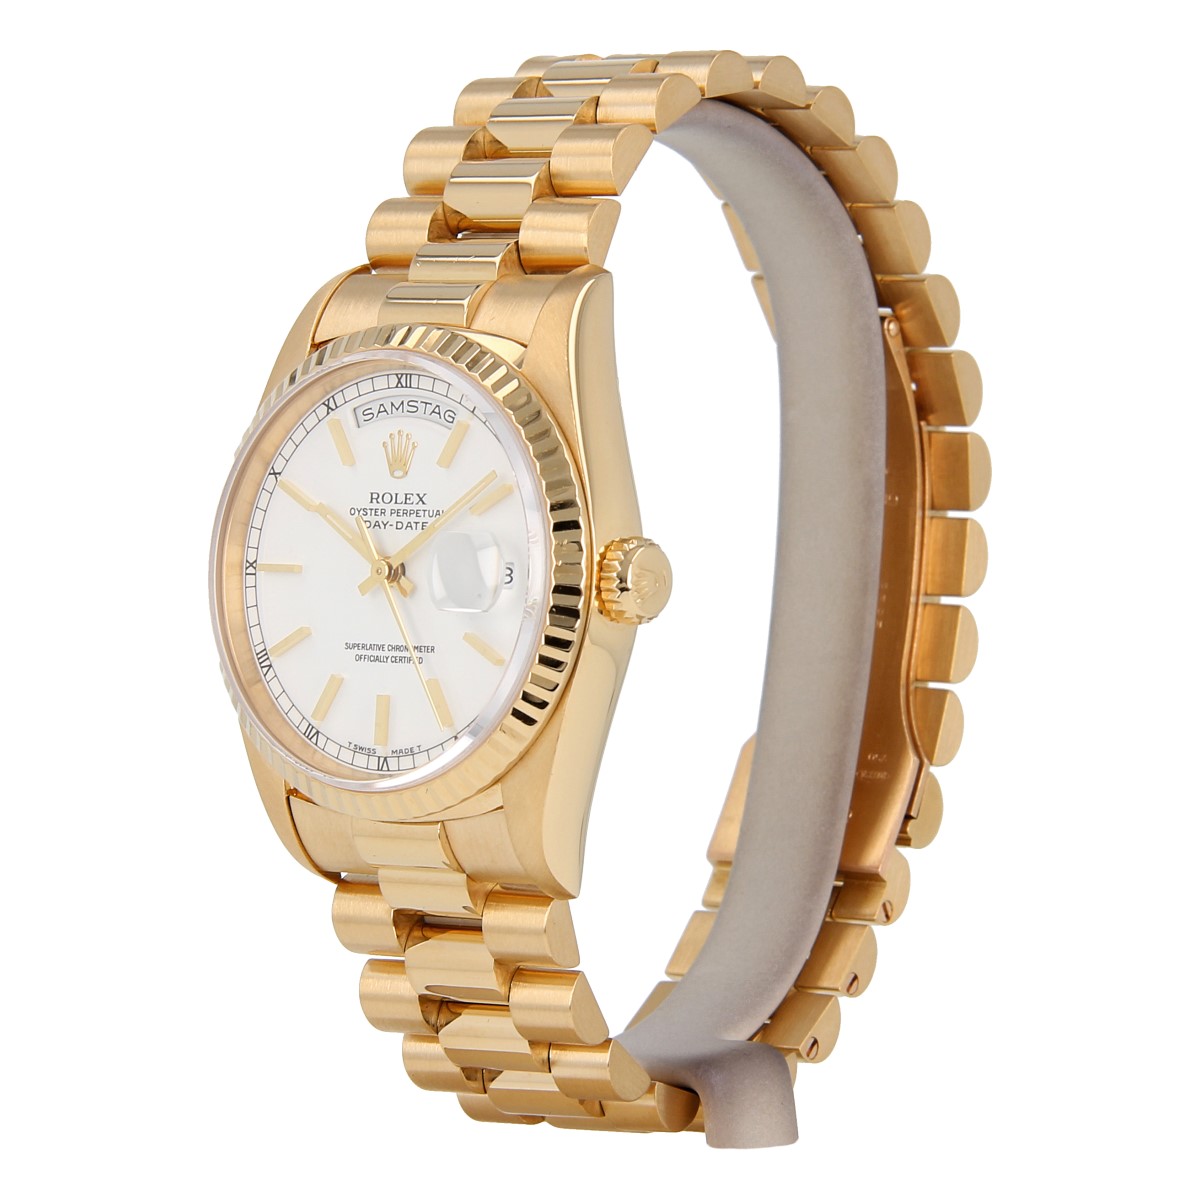 Rolex Day-Date 18238 White Dial | Buy 